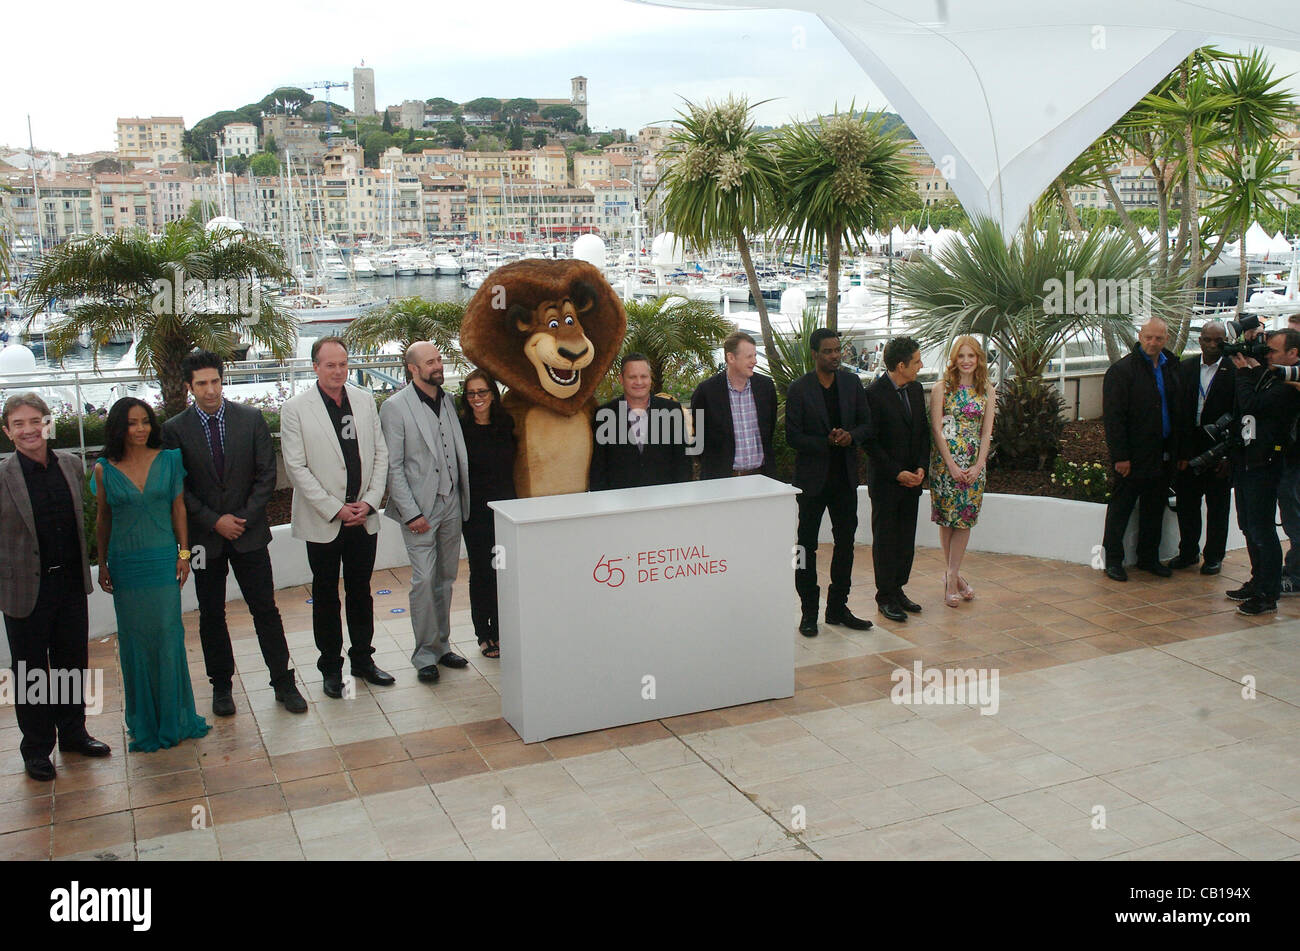 May 17, 2012 - Cannes, France - CANNES, FRANCE - MAY 18: Actors Martin Short, Jada Pinkett Smith, David Schwimmer, co-director Tom McGrath, co-director Conrad Vernon, producer Mireille Soria, co-director Eric Darnell, producer Mark Swift, actors Chris Rock, Ben Stiller and Jessica Chastain attend th Stock Photo